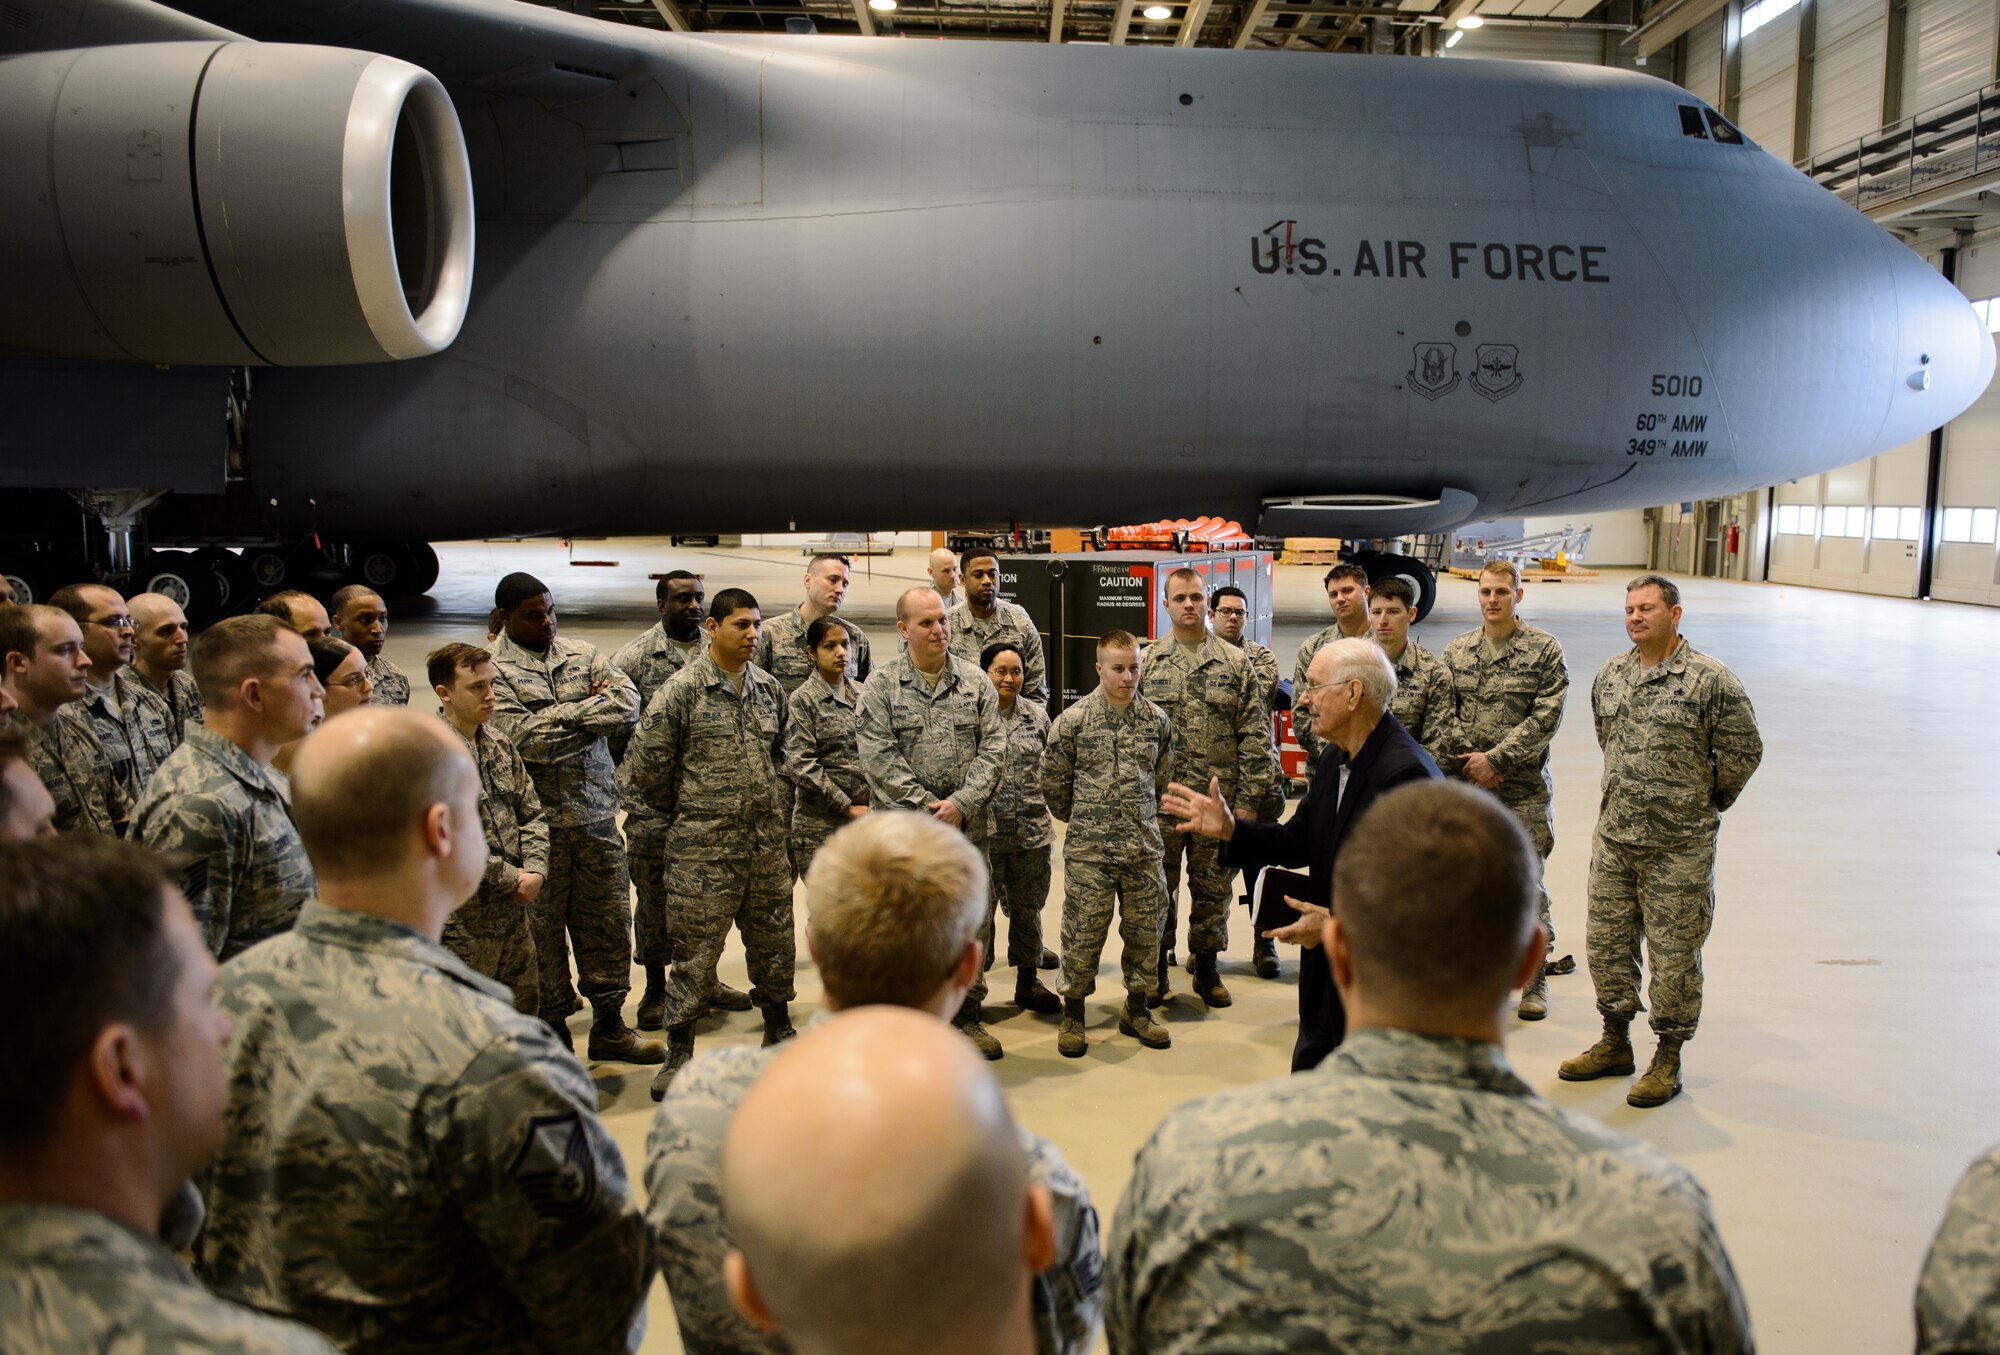 Sam E. Parish, retired Chief Master Sergeant of the Air Force, interacts with Airmen of the 721st Aircraft Maintenance Squadron Jan. 27, 2016, at Ramstein Air Base, Germany. Airmen from the 521st Air Mobility Operations Wing had an opportunity to meet Parish and discuss the differences from when Parish enlisted and the current Air Force. Parish was the guest speaker at a variety of venues including Airman Leadership School, squadron all calls, and the chief induction ceremony as part of his visit. (U.S. Air Force photo/Staff Sgt. Armando A. Schwier-Morales)